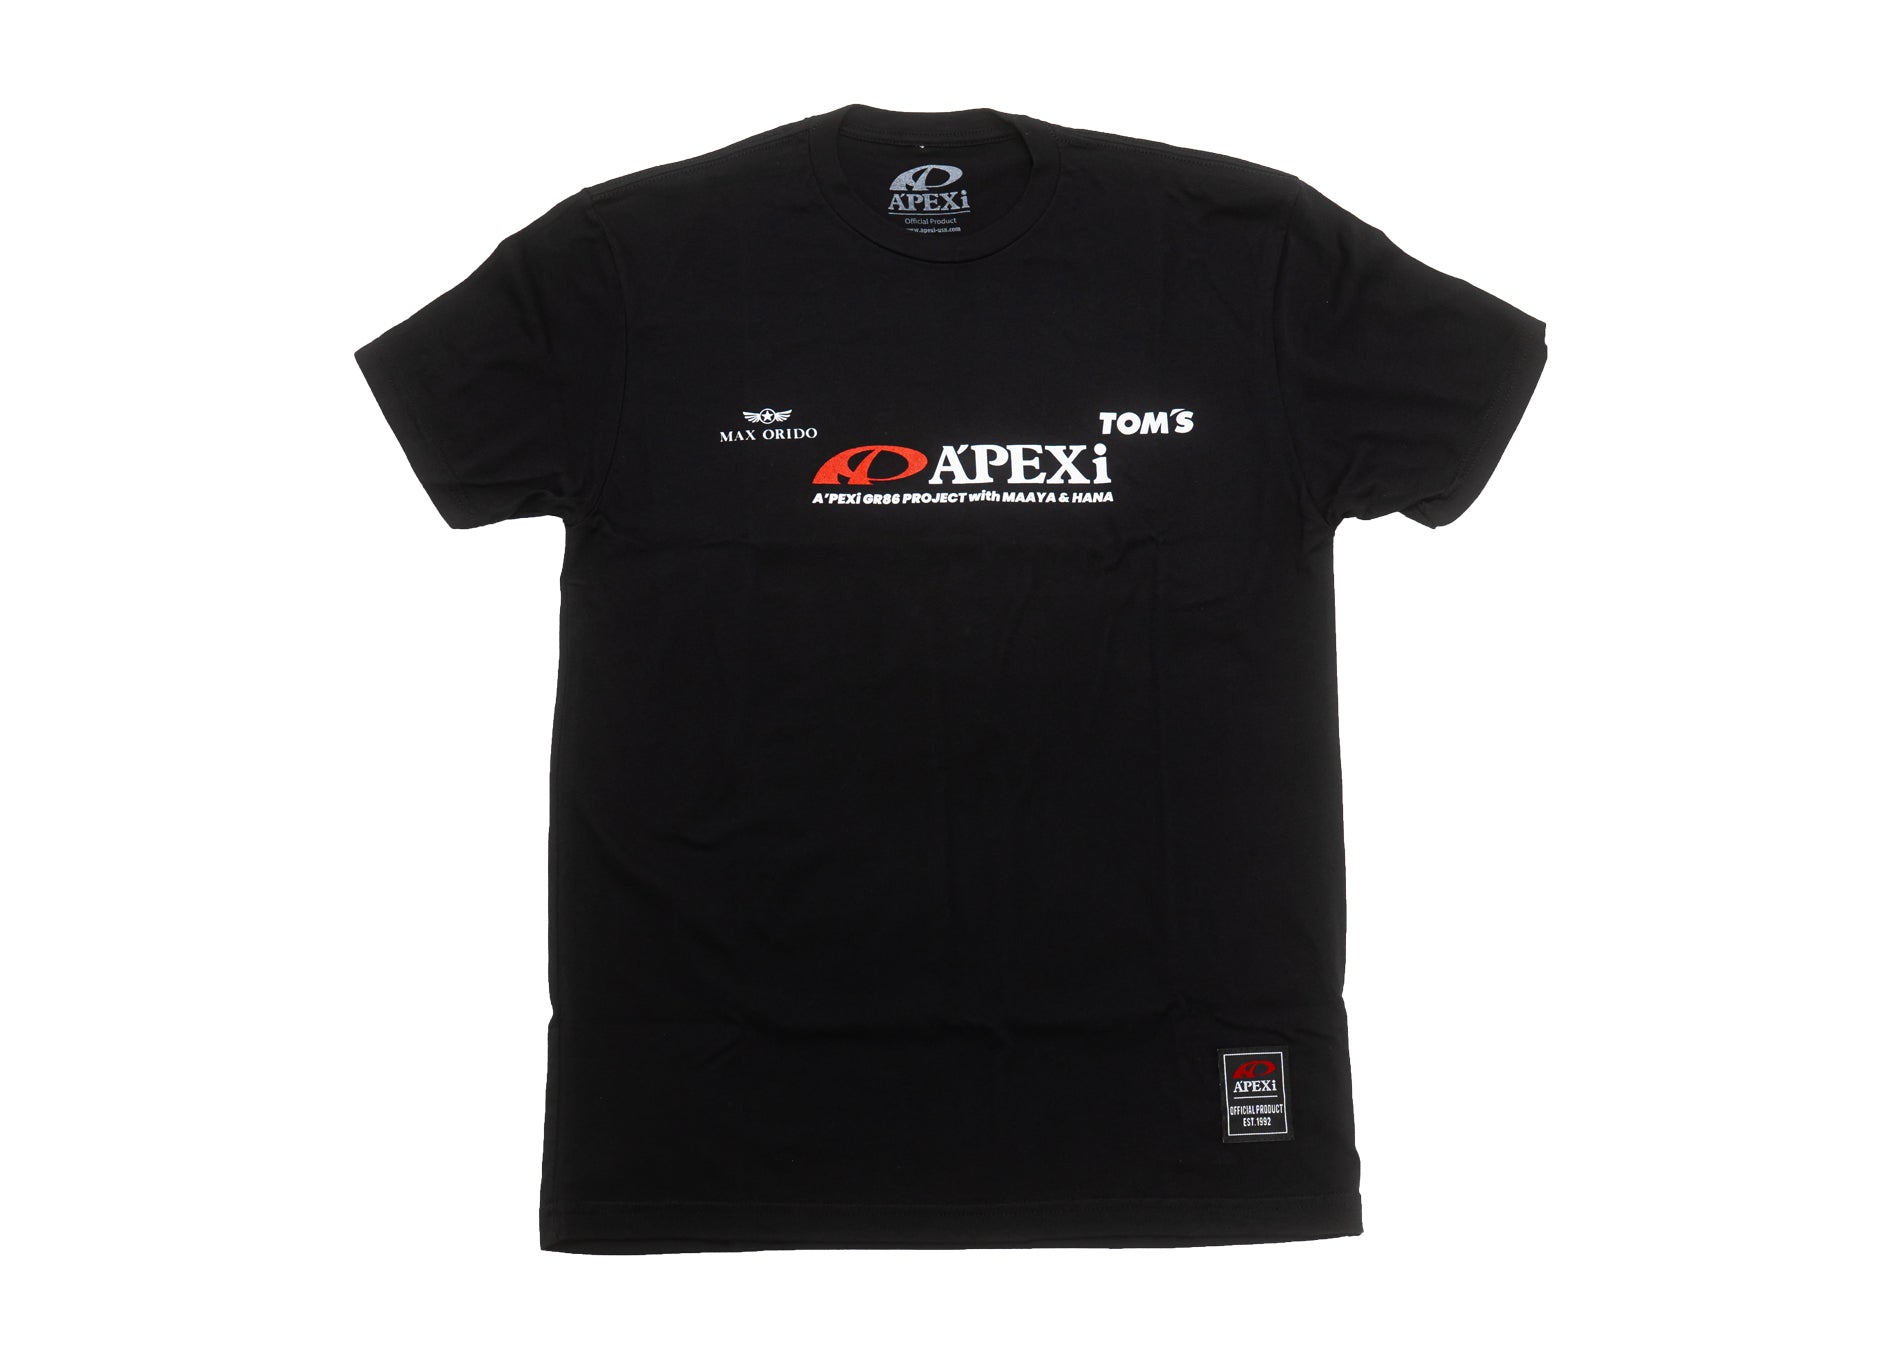 A'PEXi - A'PEXi GR86 Project Team T-Shirt ** LIMITED EDITION **